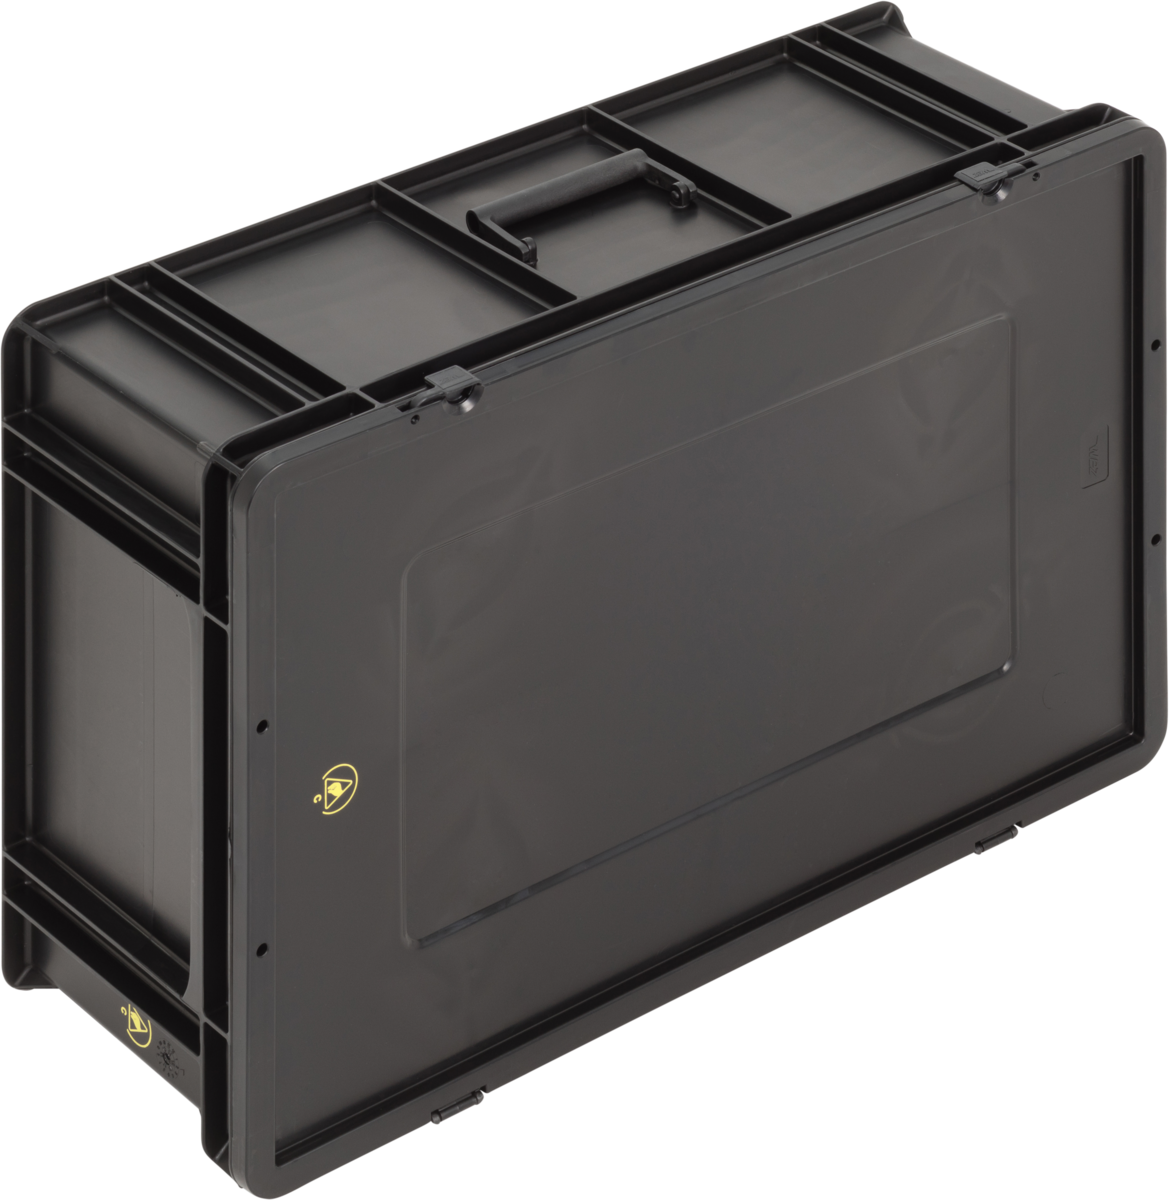 ESD-Safe-SGL-Norm-Carrying-Cases-Flat-Base-007-Ref.-6420.397.992_1004501_600x400x221_03